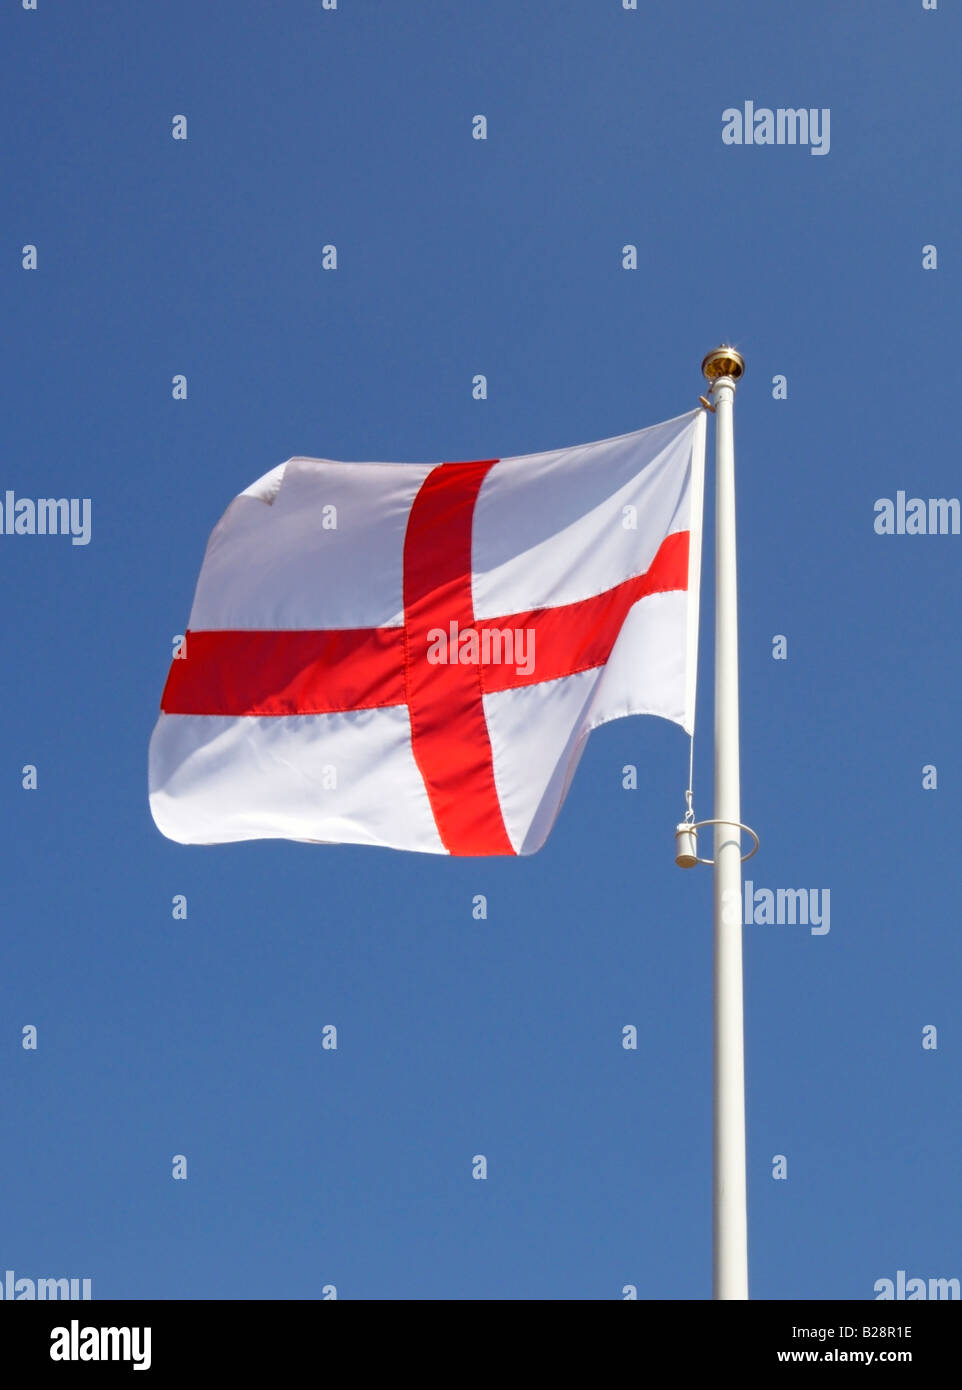 The red cross stands in the middle of a white background in the England  flag. Free to download and print